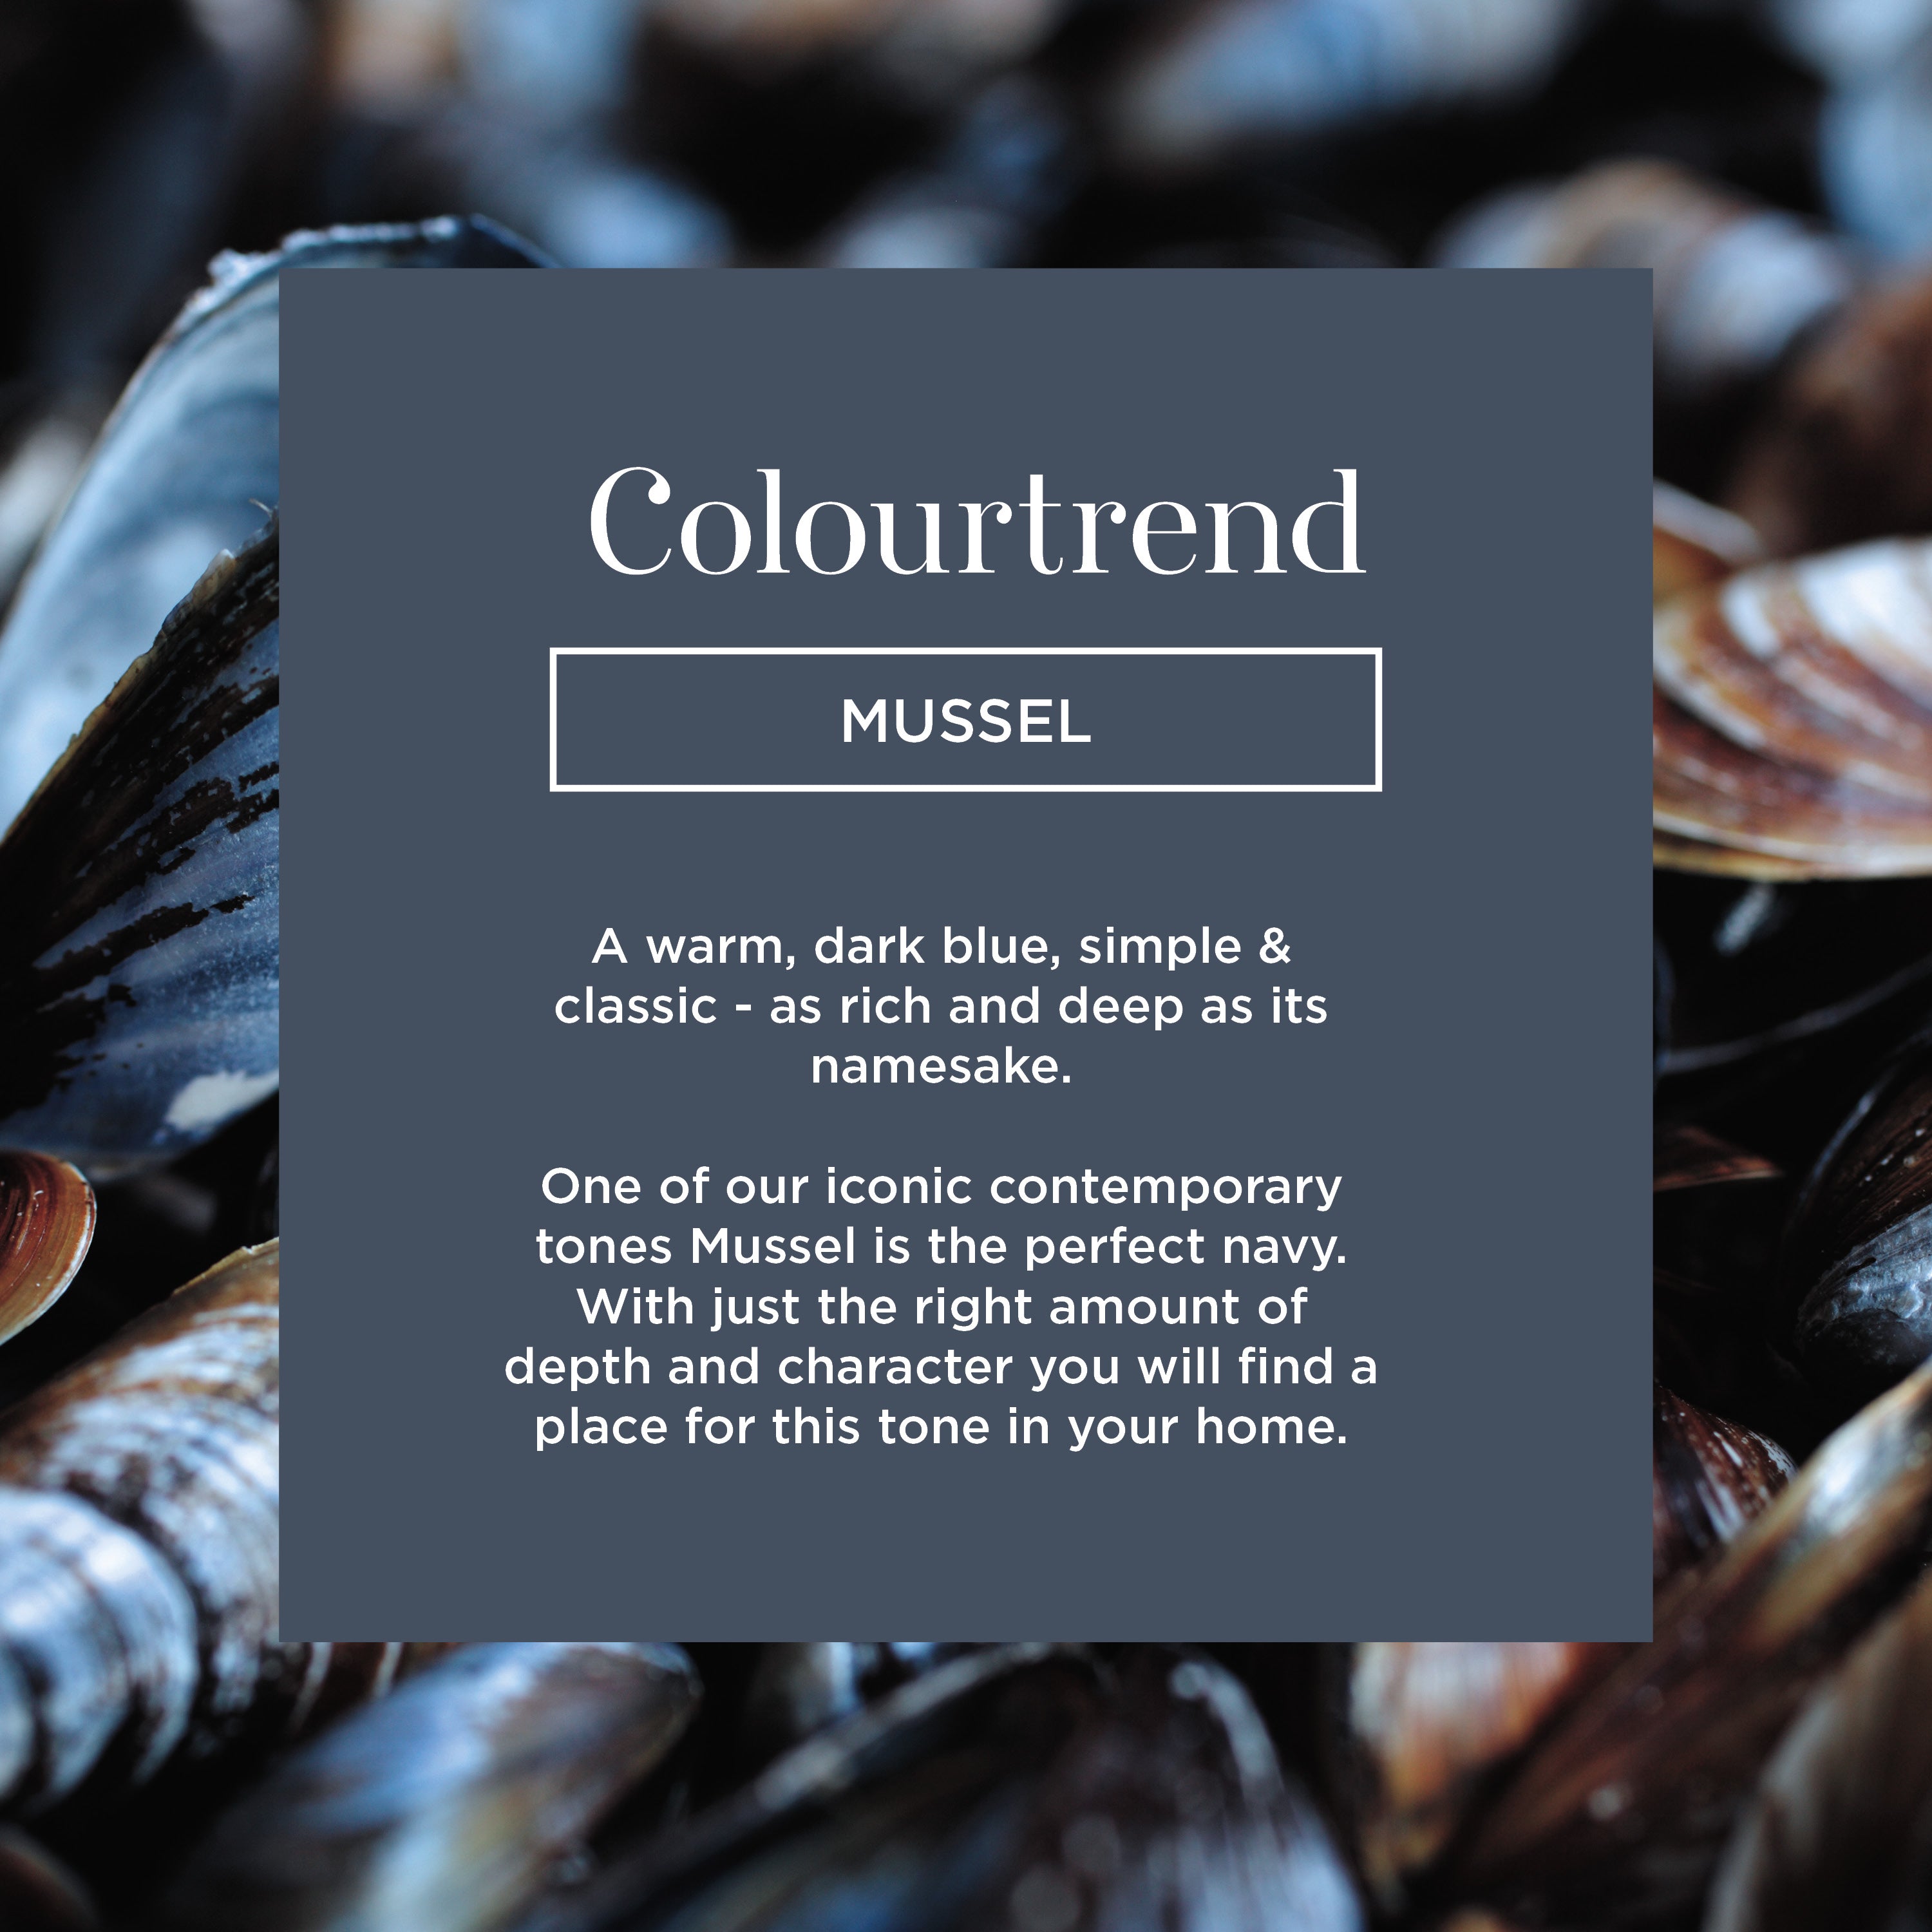 Colourtrend Mussel | Same Day Dublin and Nationwide Paint in Ireland Delivery by Weirs of Baggot Street - Official Colourtrend Stockist